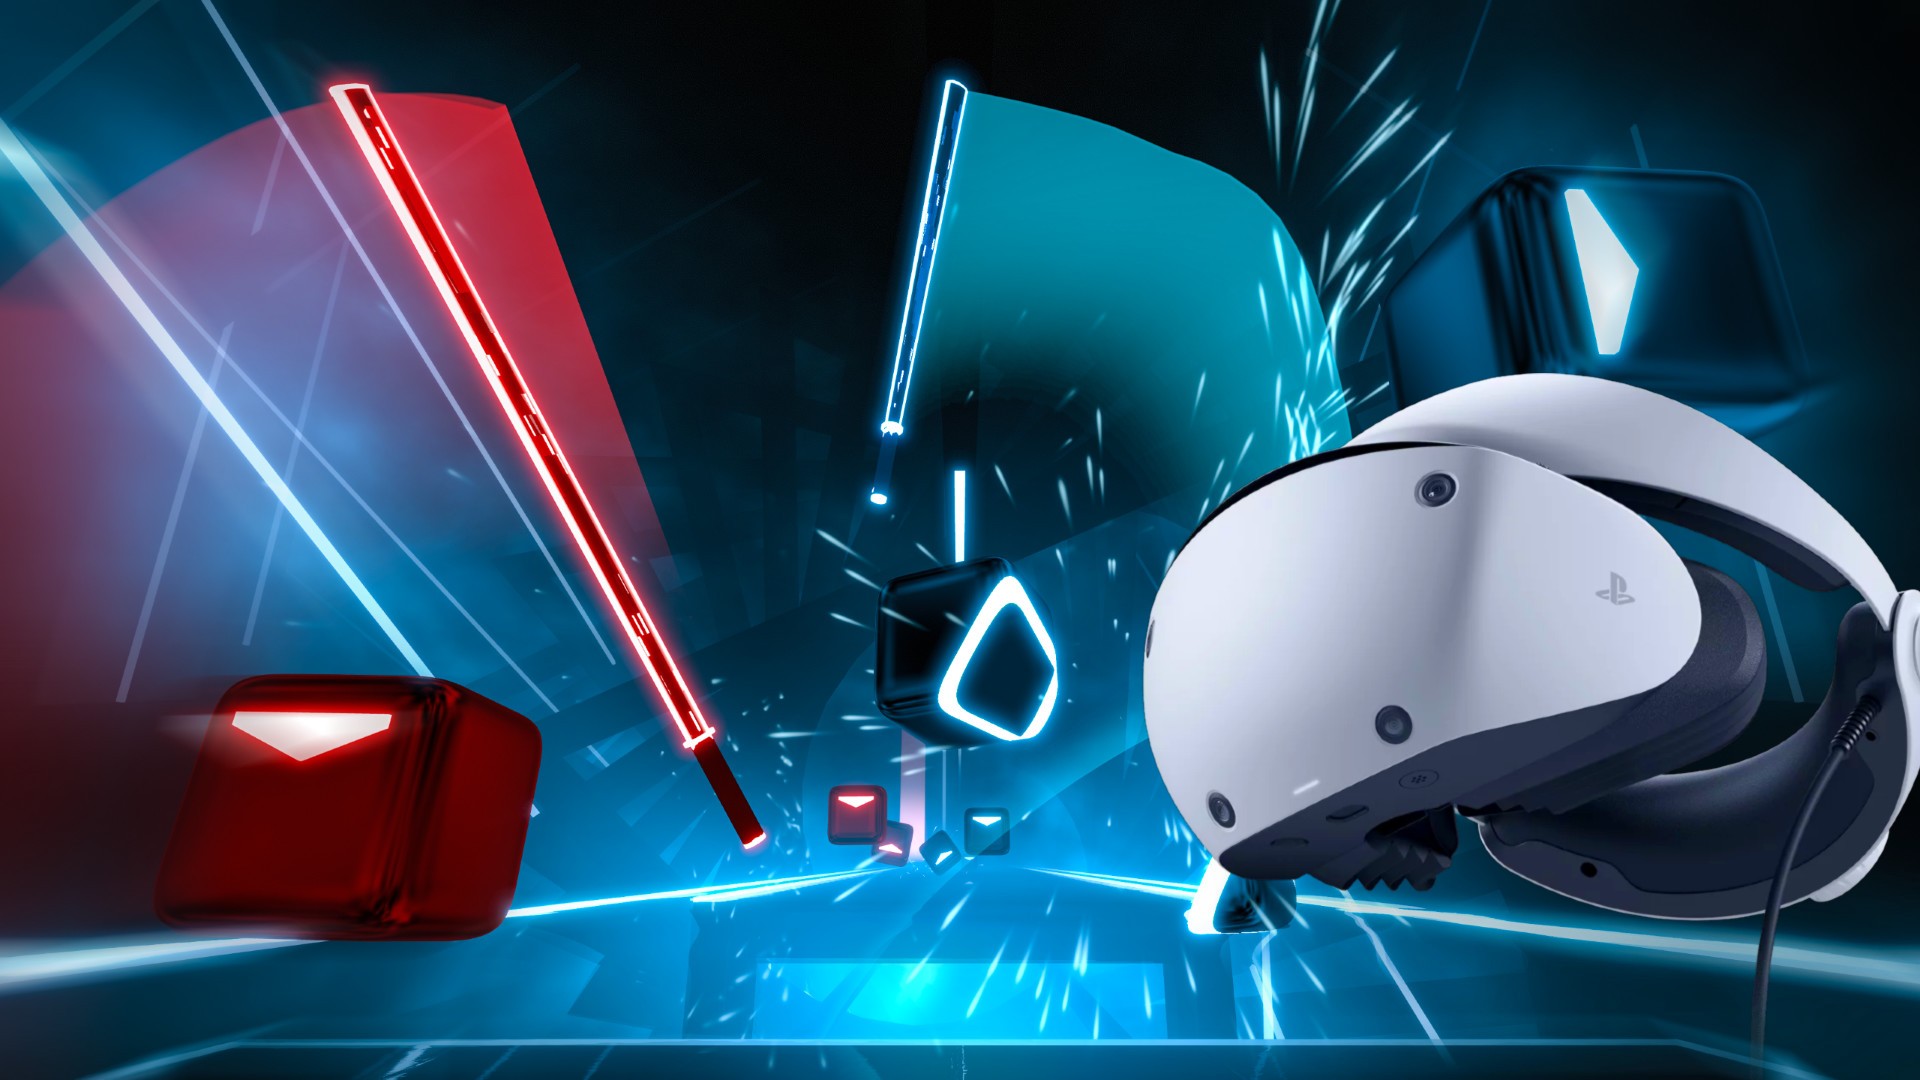 Late to PSVR 2, ‘Beat Saber’ Continues to Dominate Most Downloaded Charts – Road to VR